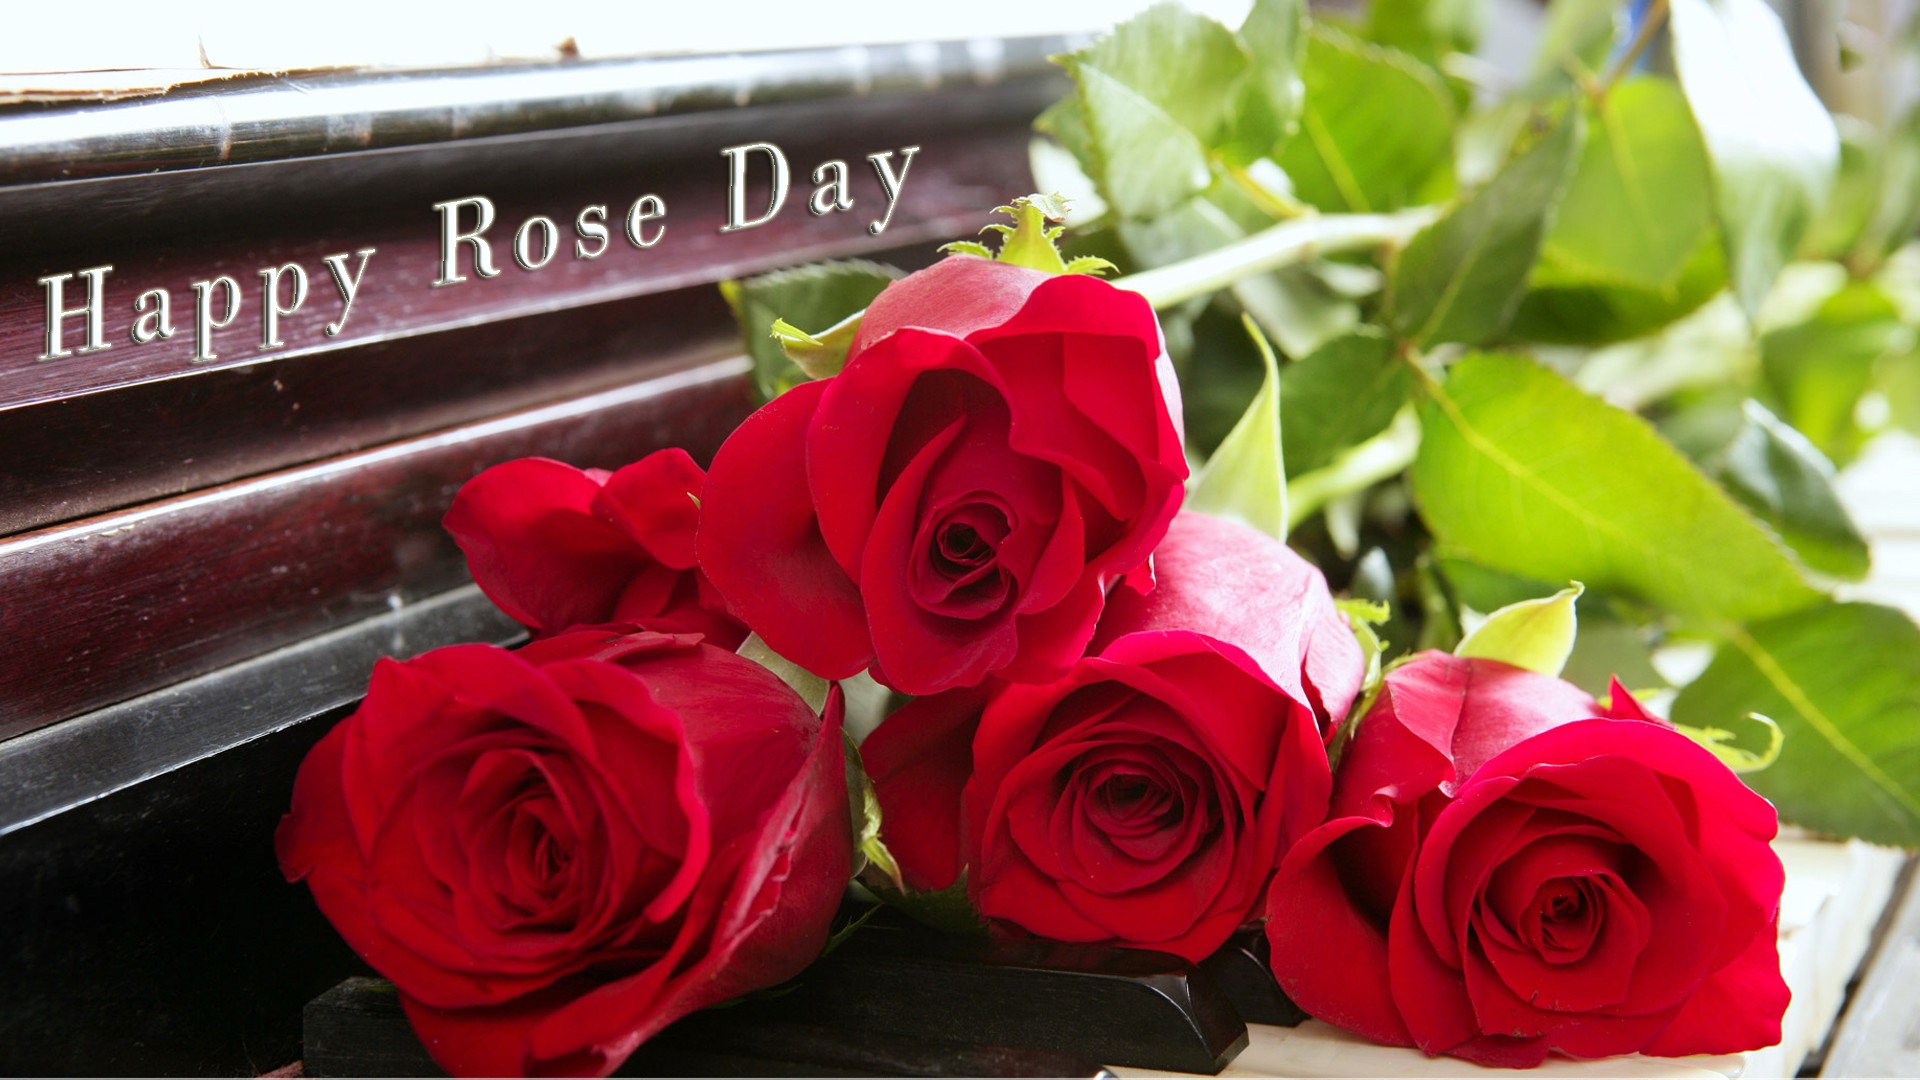 Happy Rose Day HD Wallpaper New